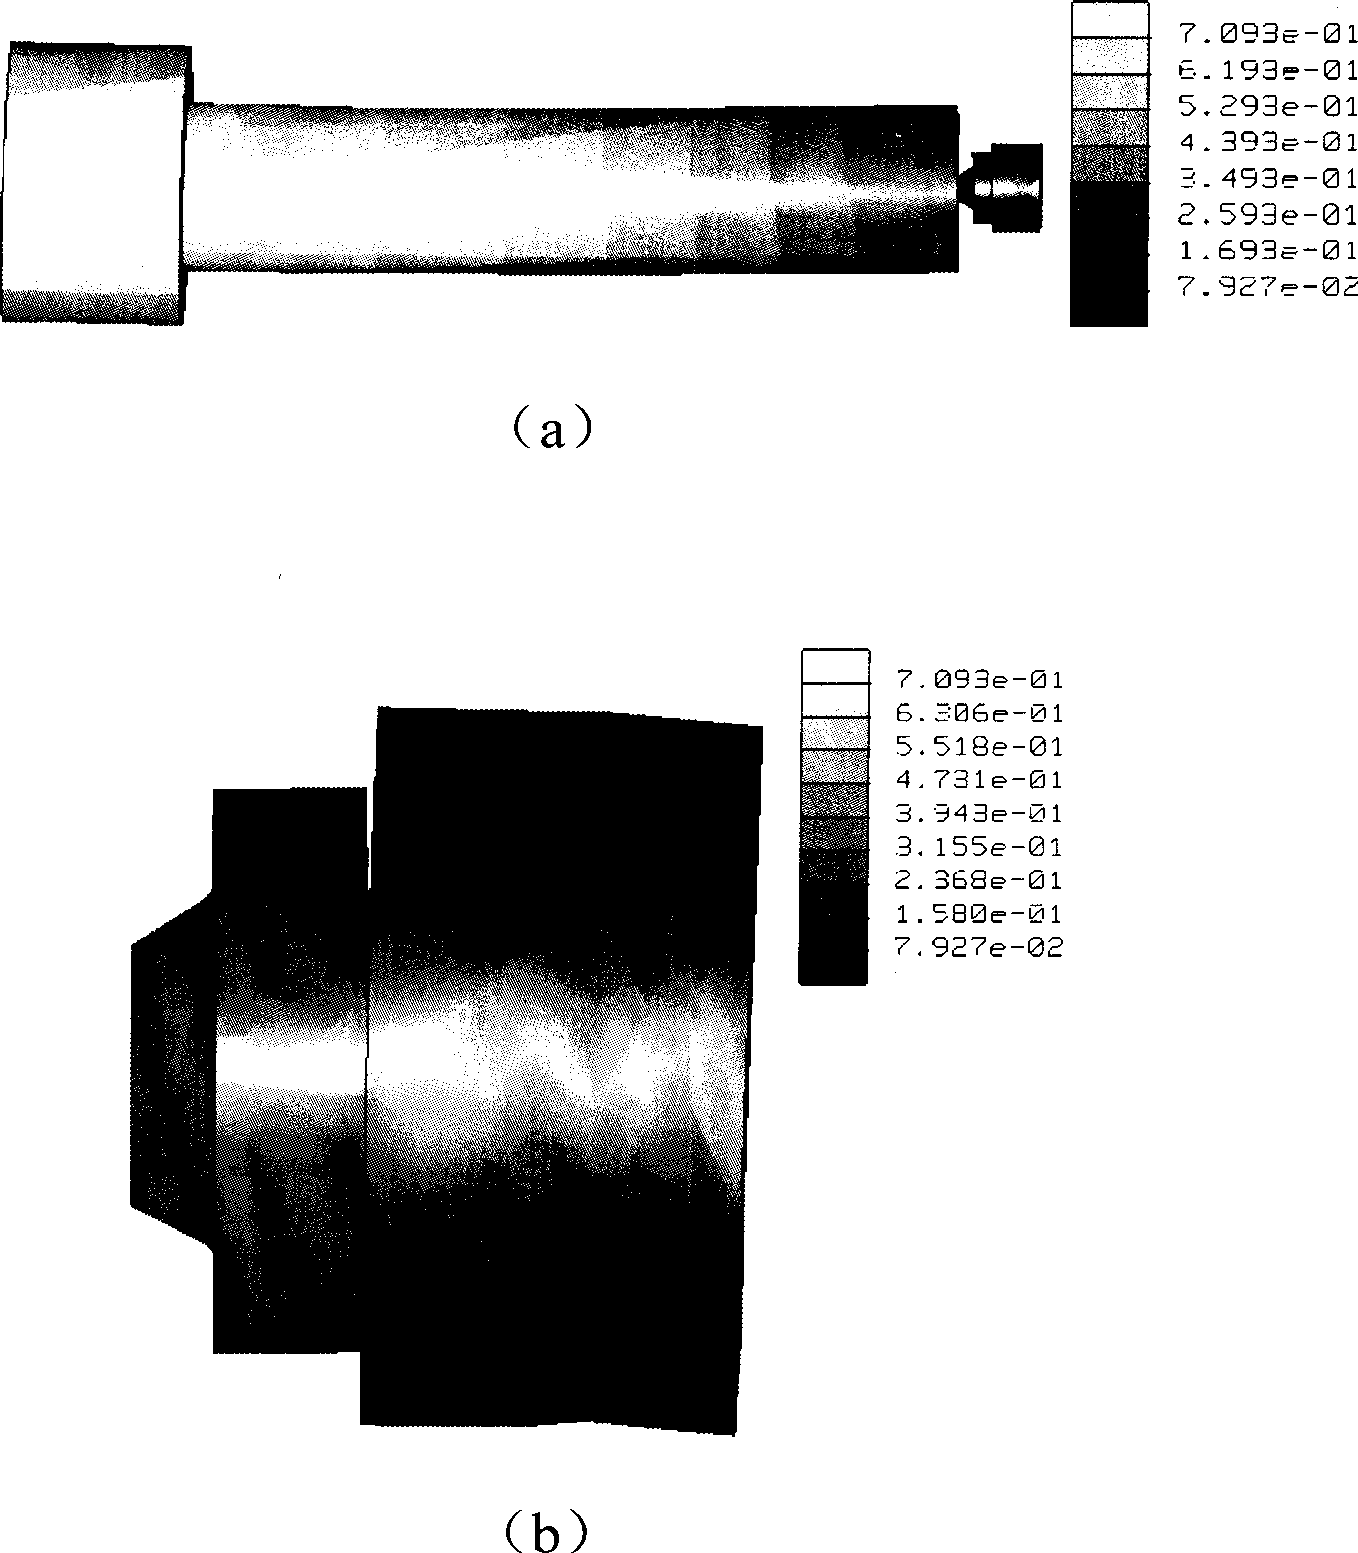 Non-support grinding and high stiffness principal axis system simulation and analysis method